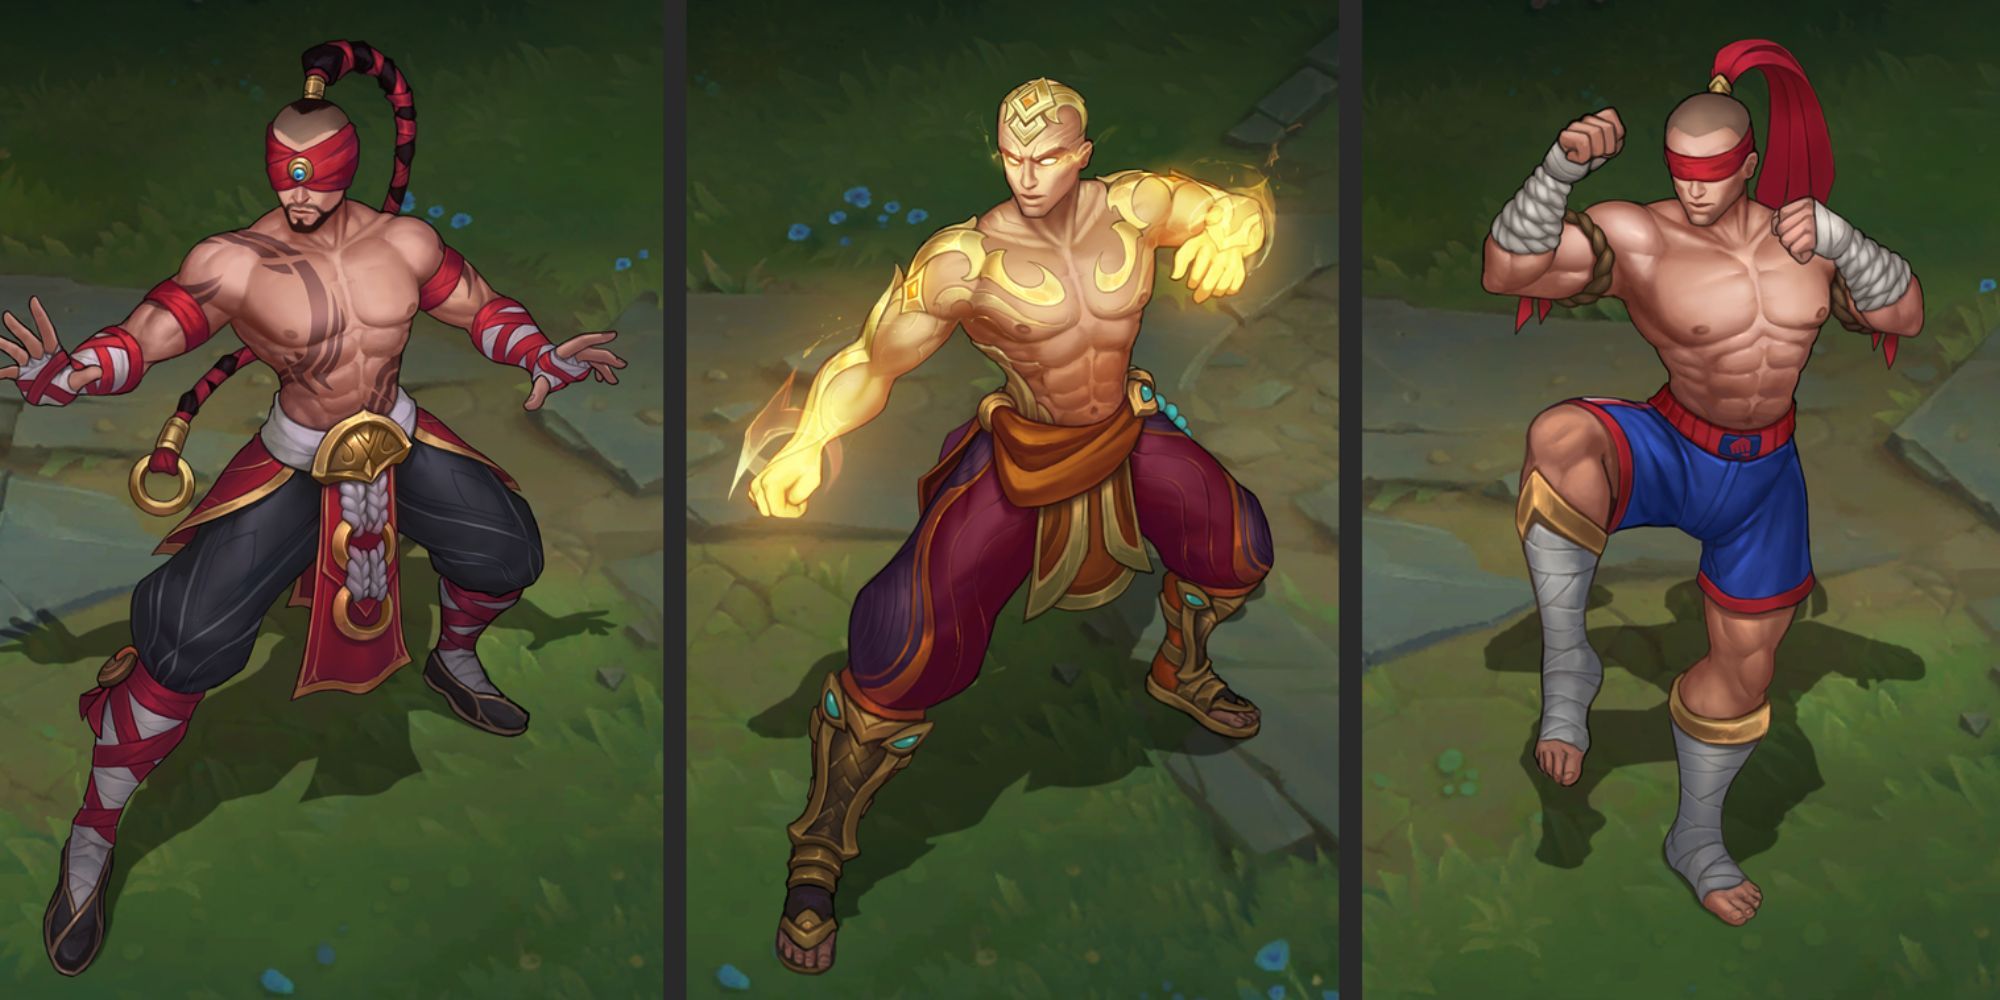 Lee Sin's visual update from League of Legends.